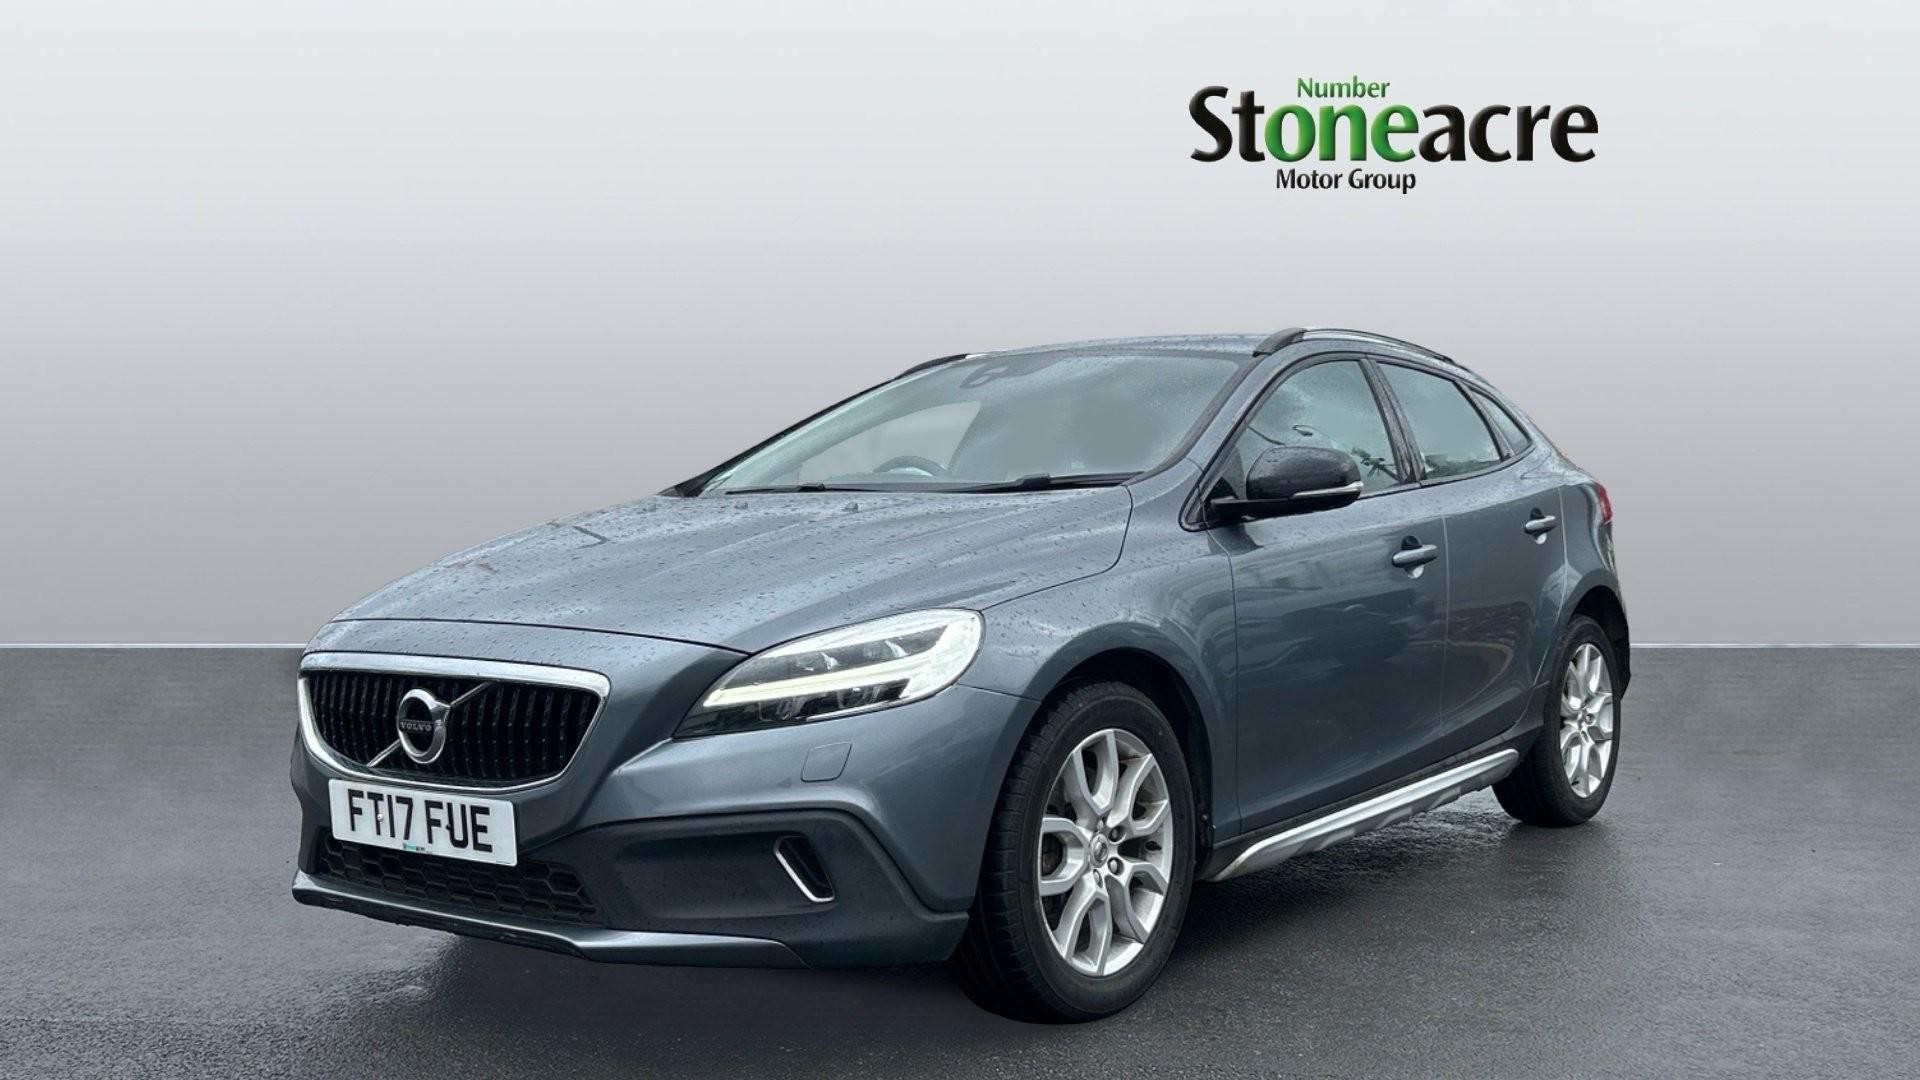 Volvo V40 Cross Country 1.5 T3 Pro Auto Euro 6 (s/s) 5dr (FT17FUE) image 5